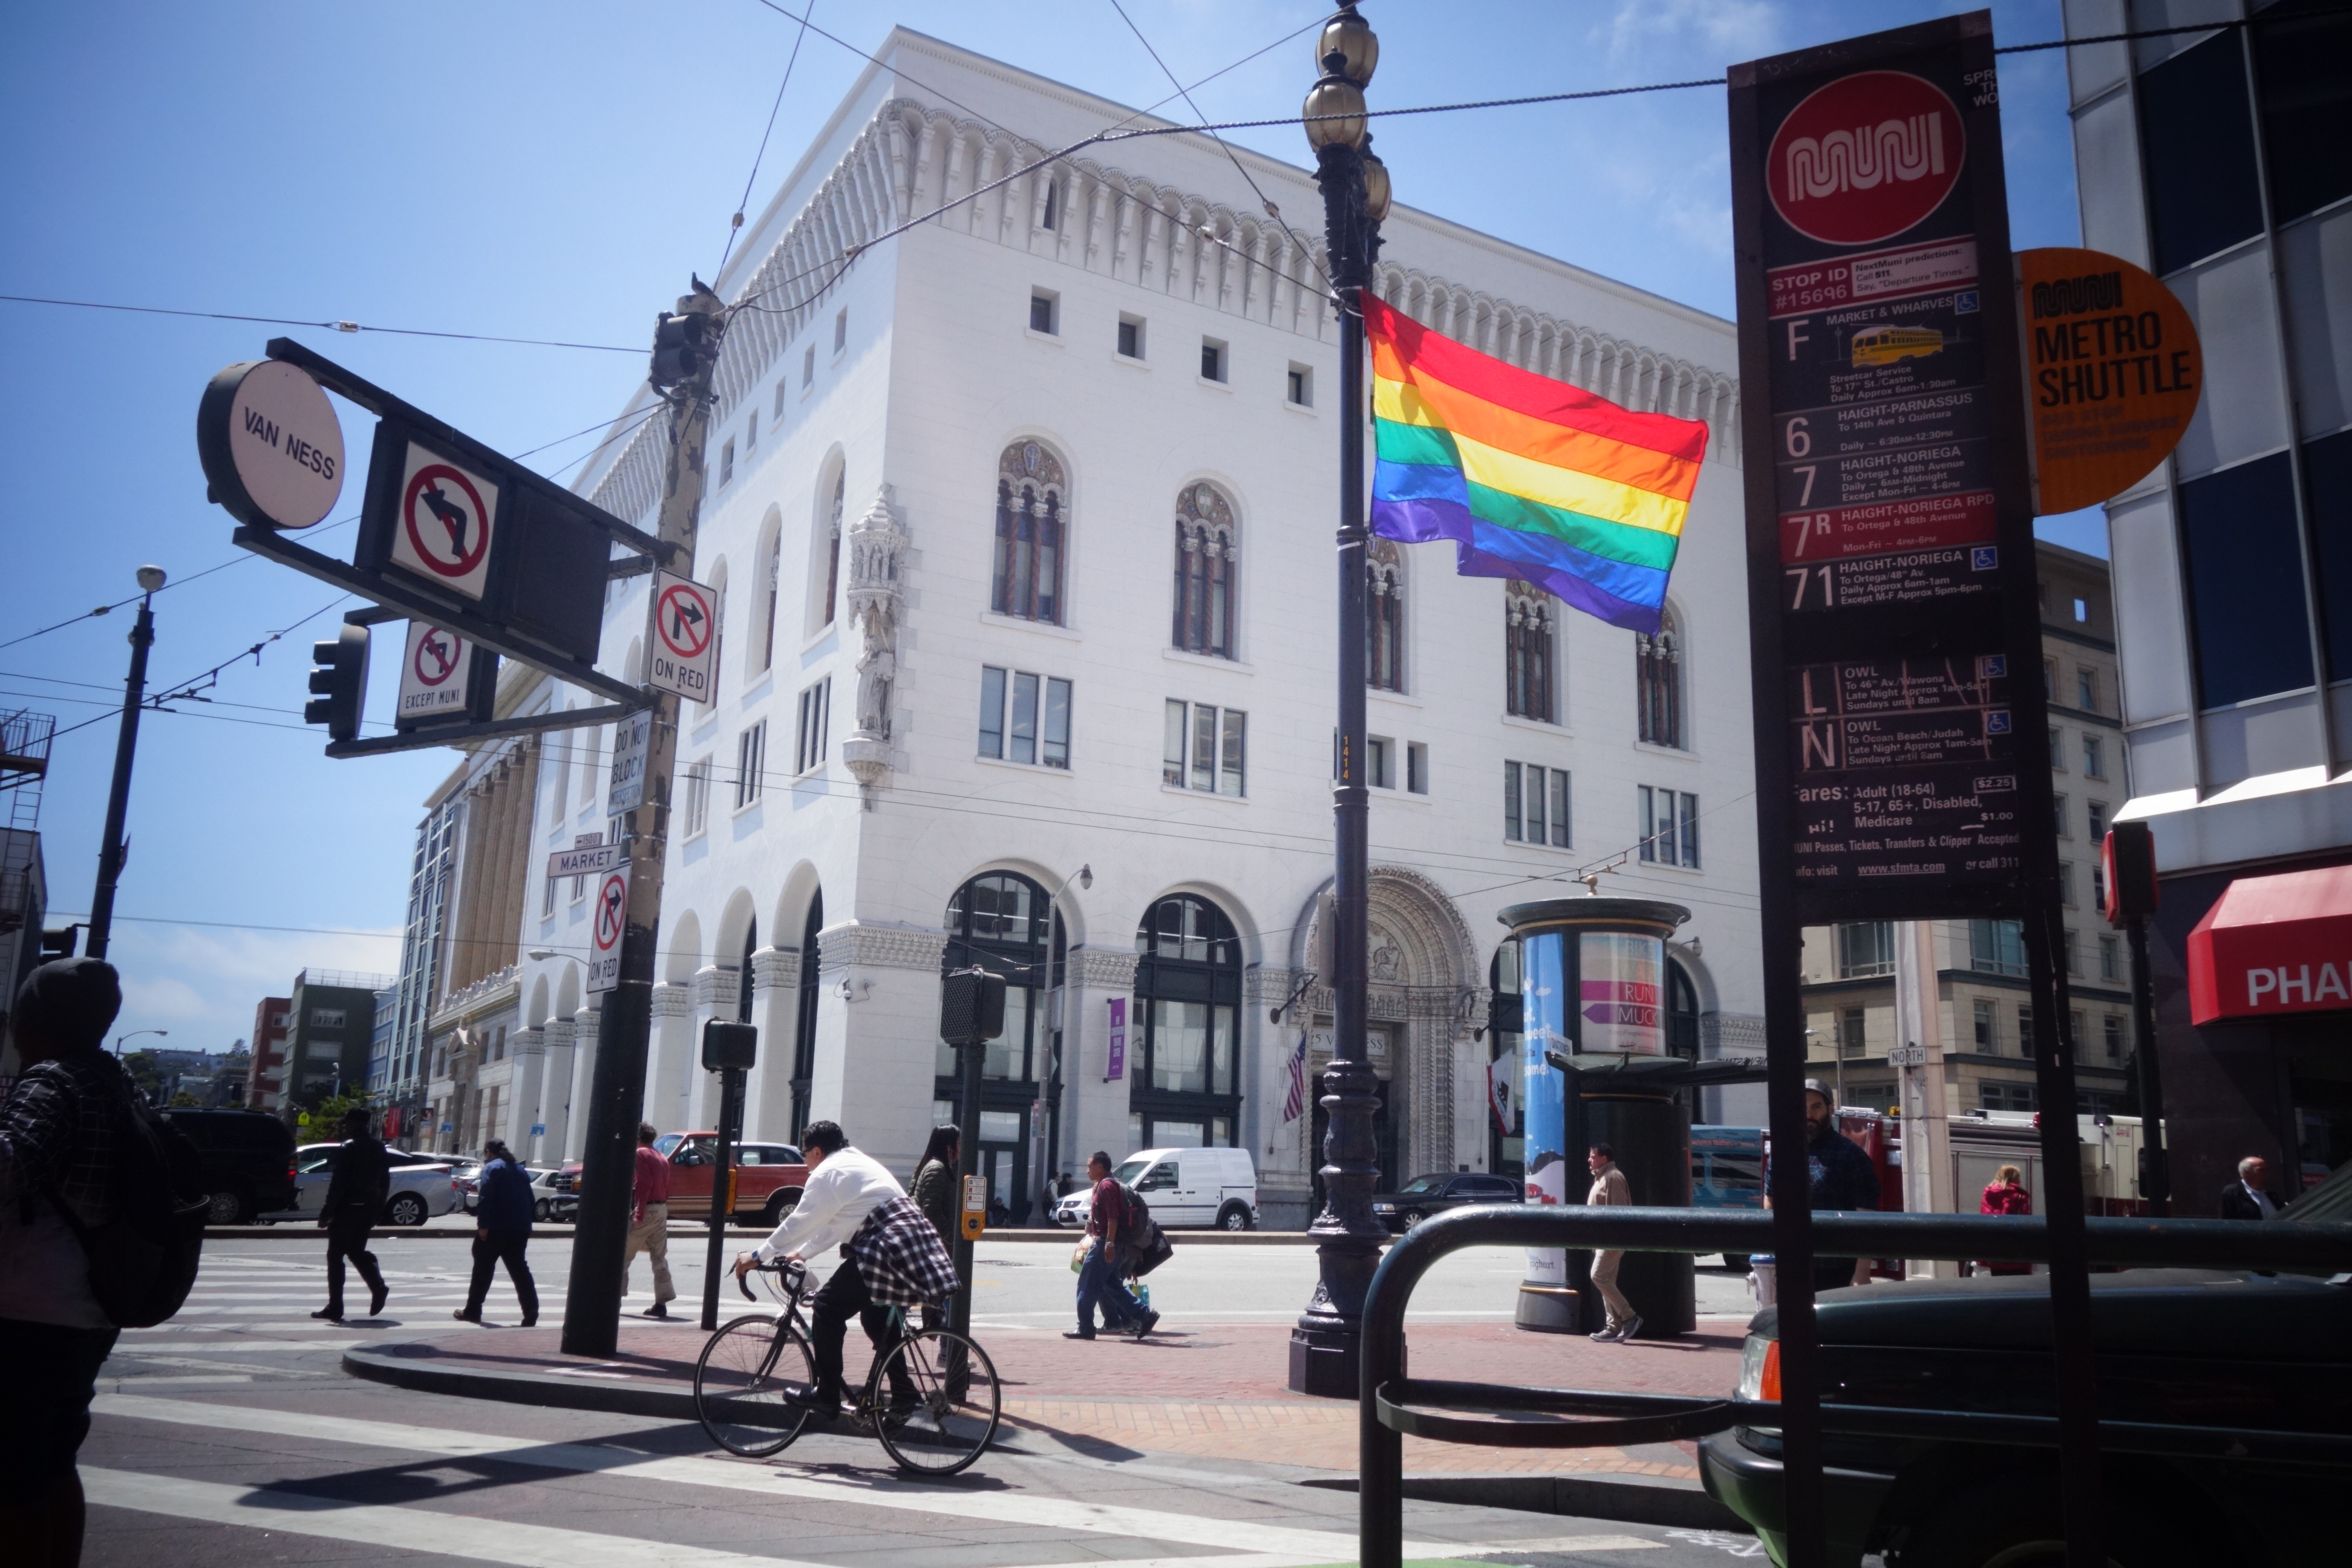 A rainbow flag, a symbol of the LGBT community, flies in San Francisco at the corners of Market Street and Van Ness on June 13, 2016. (Katy Steinmetz for TIME)